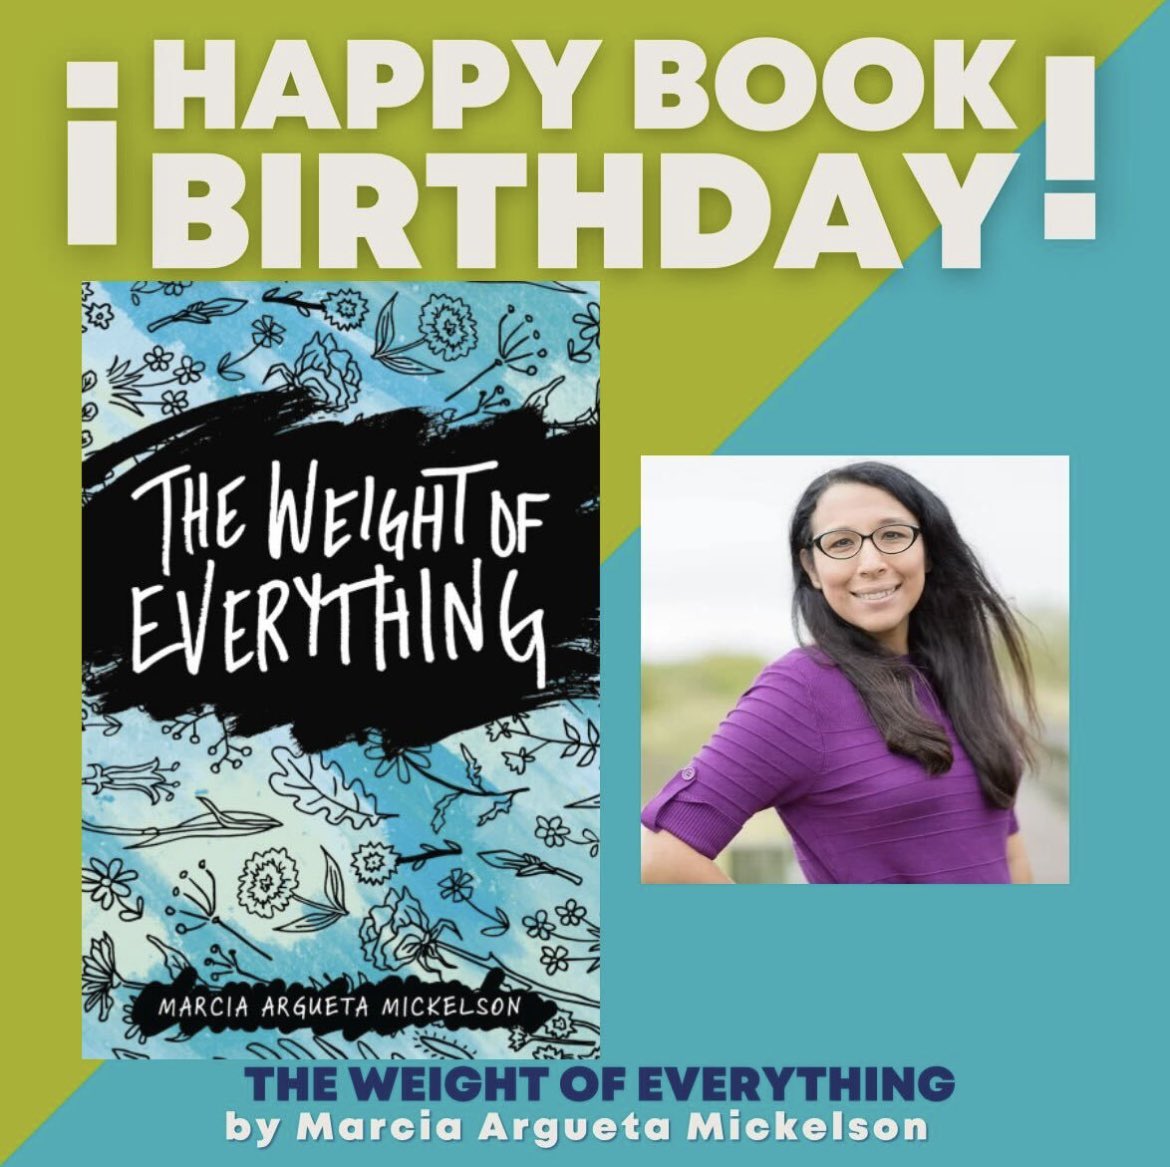 🎉 Please join us in wishing a happy book birthday to “The Weight of Everything” written by fellow Musa Marcia Argueta Mickelson. 🎉 Congratulations @MarciaMickelson! 🥳 #lasmusasbooks #ya #latinxwriters #WritingCommmunity